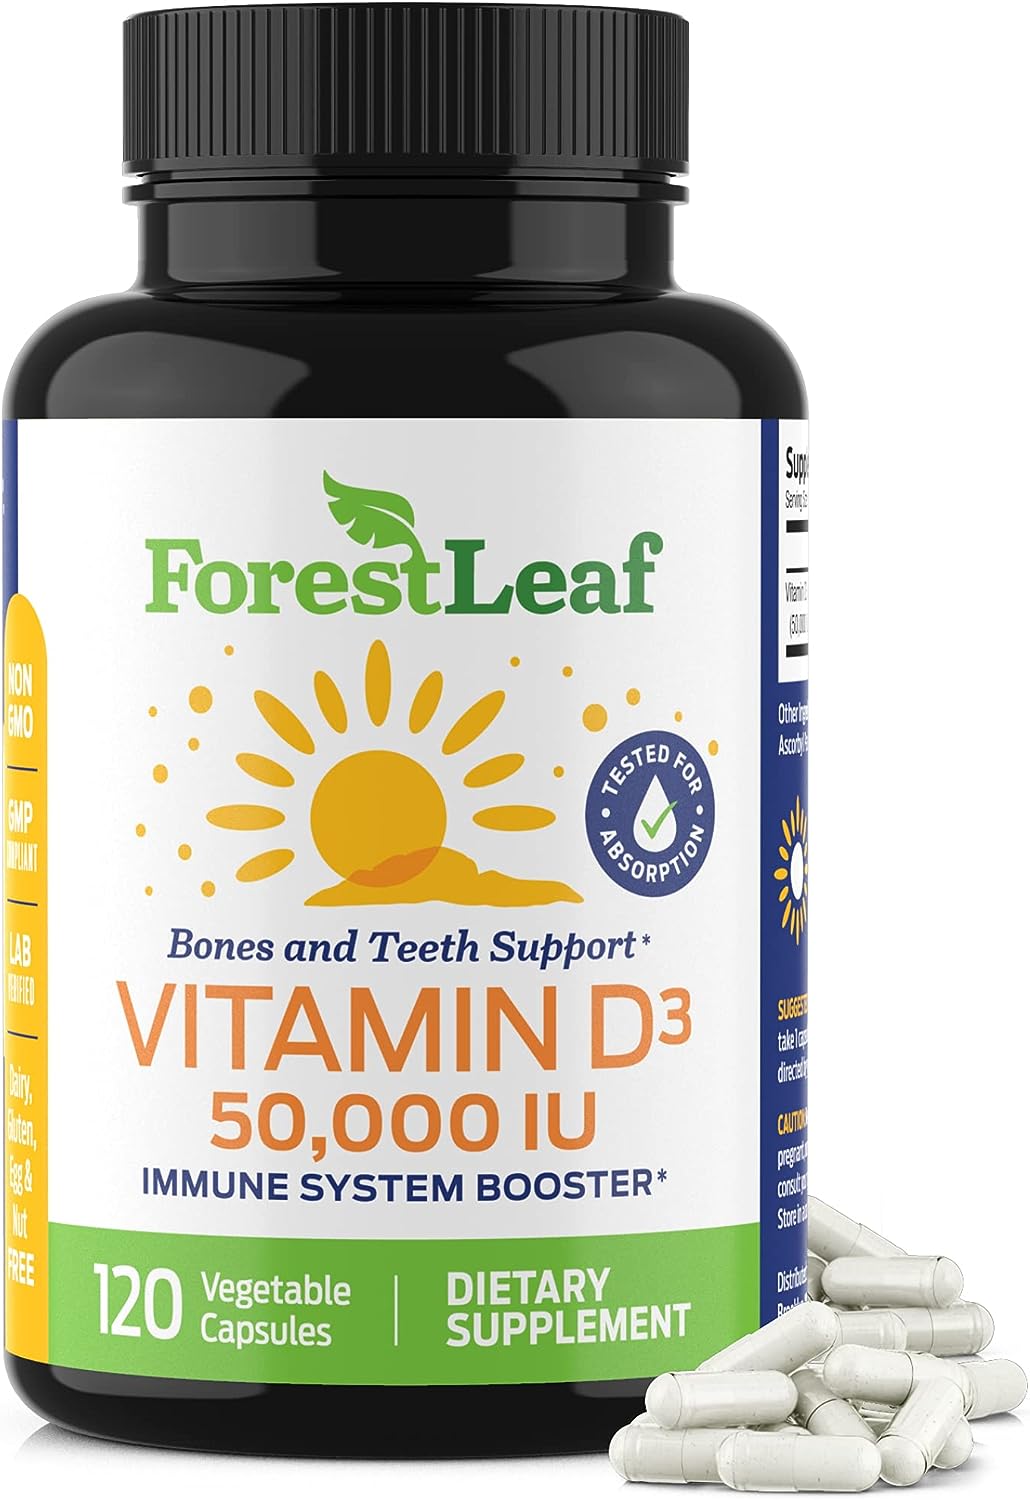 forestleaf vitamin d3 50000 iu weekly supplement review